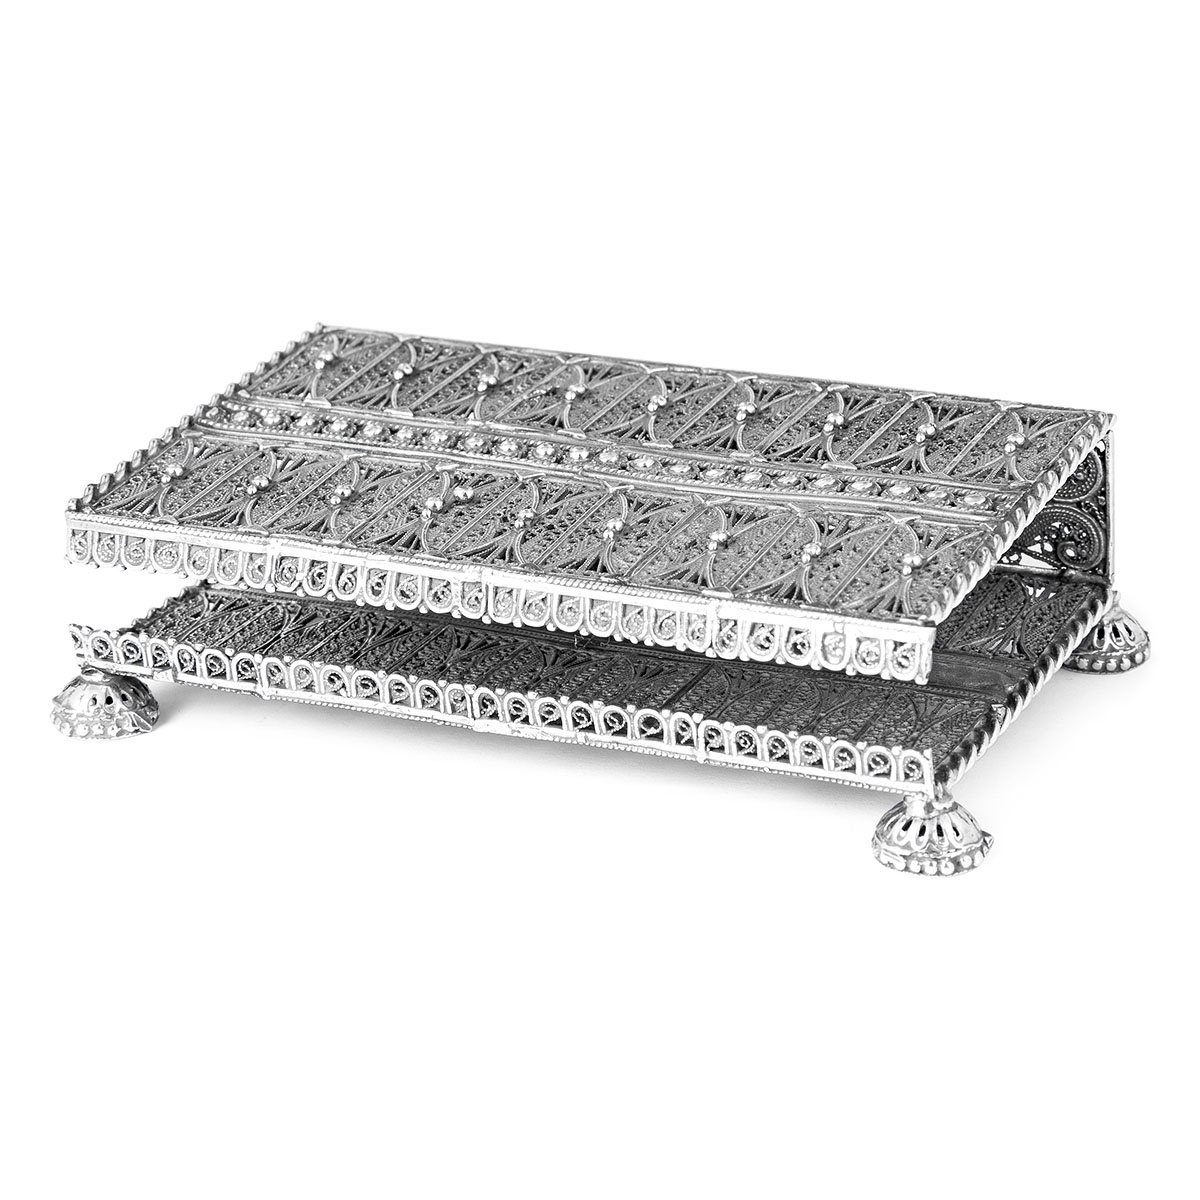 Traditional Yemenite Art Handcrafted Sterling Silver Matchbox Holder With Filigree Design - 1